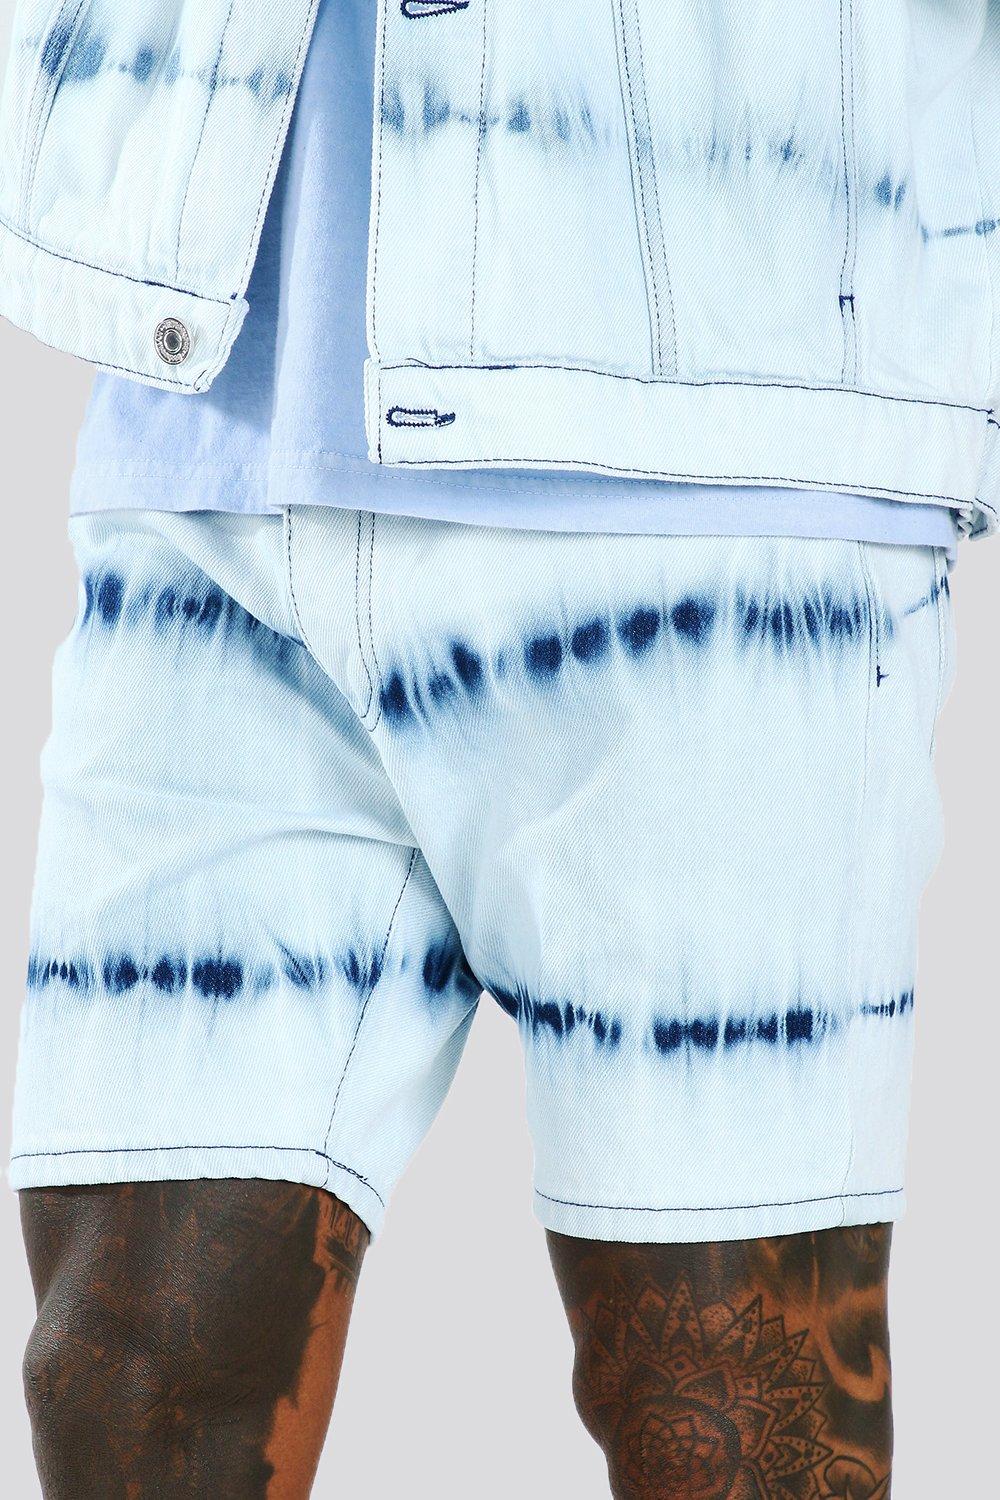 bleached jean shorts